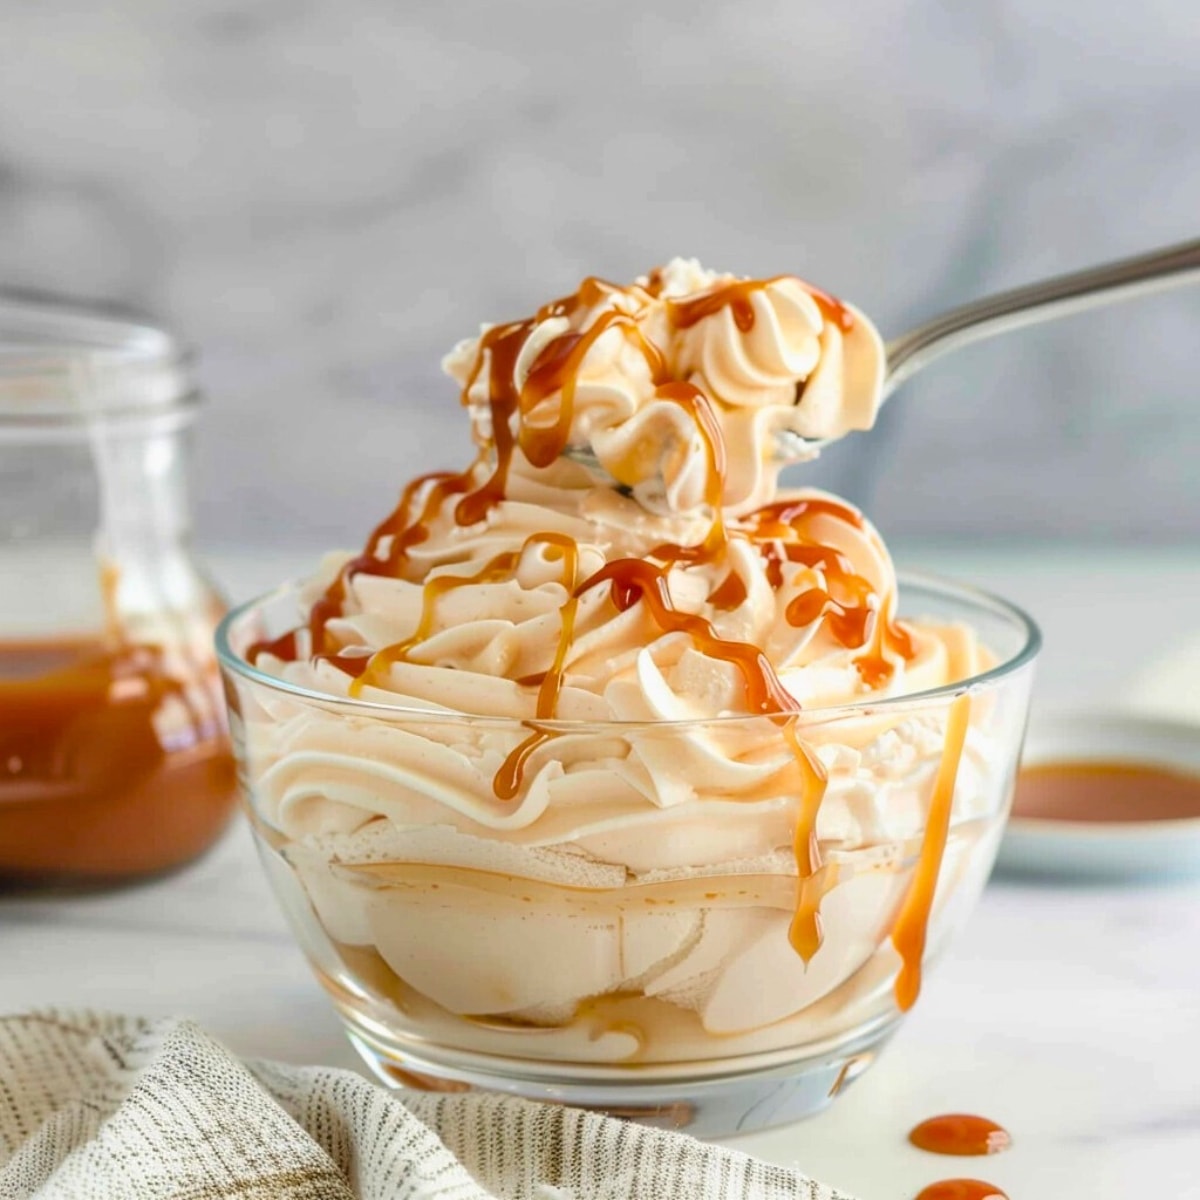 Spoon scooping salted caramel whipped cream on a glass bowl.